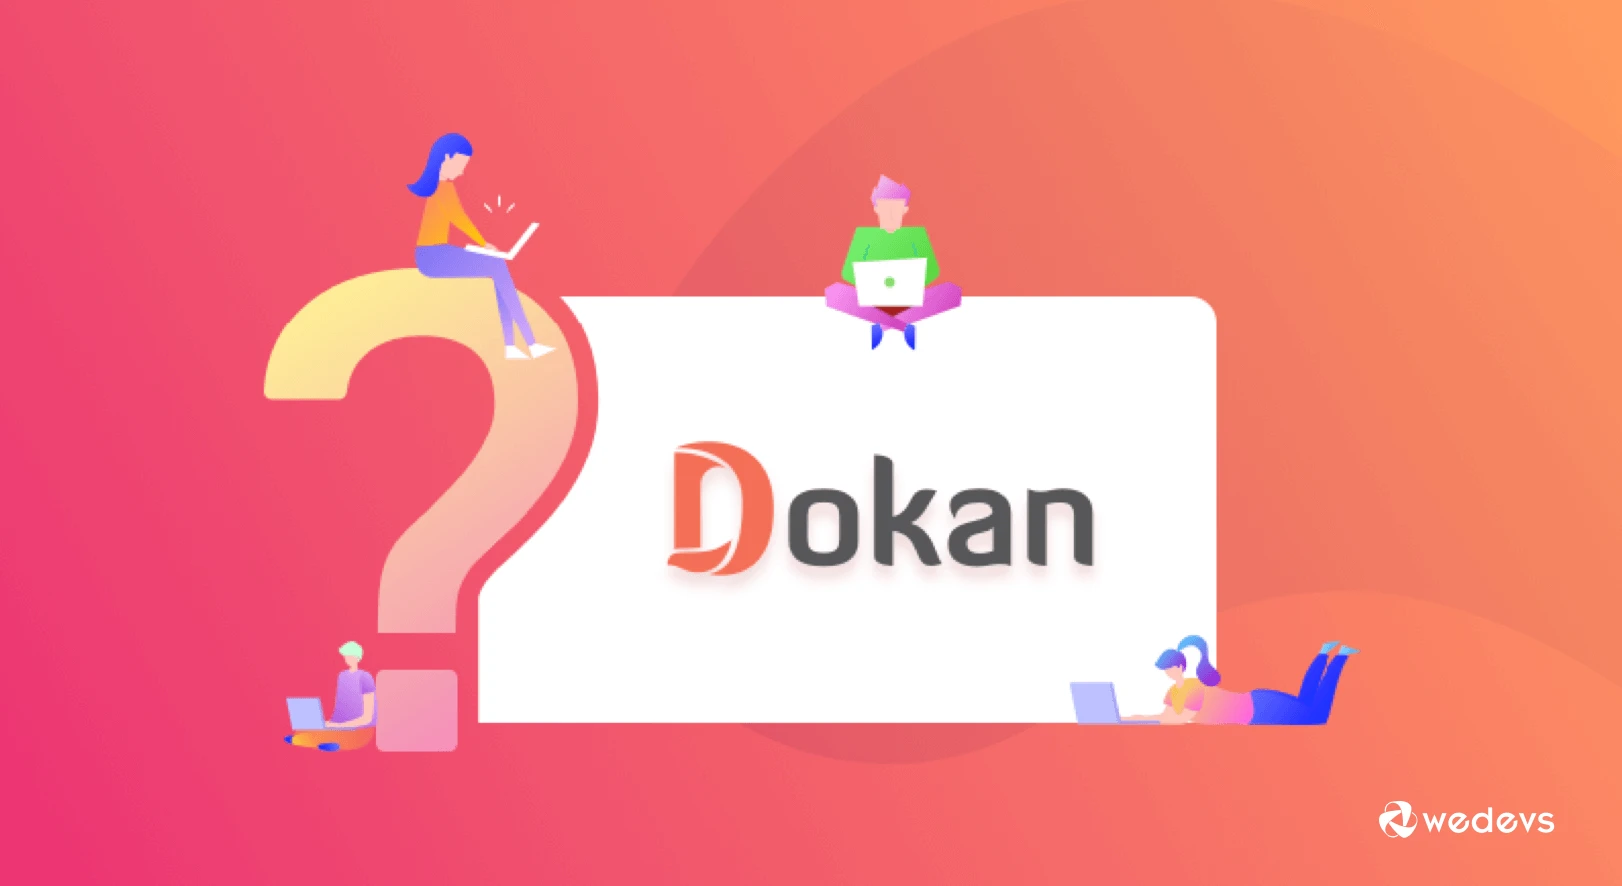 Questions You May Have on Your Mind about Dokan (FAQ)